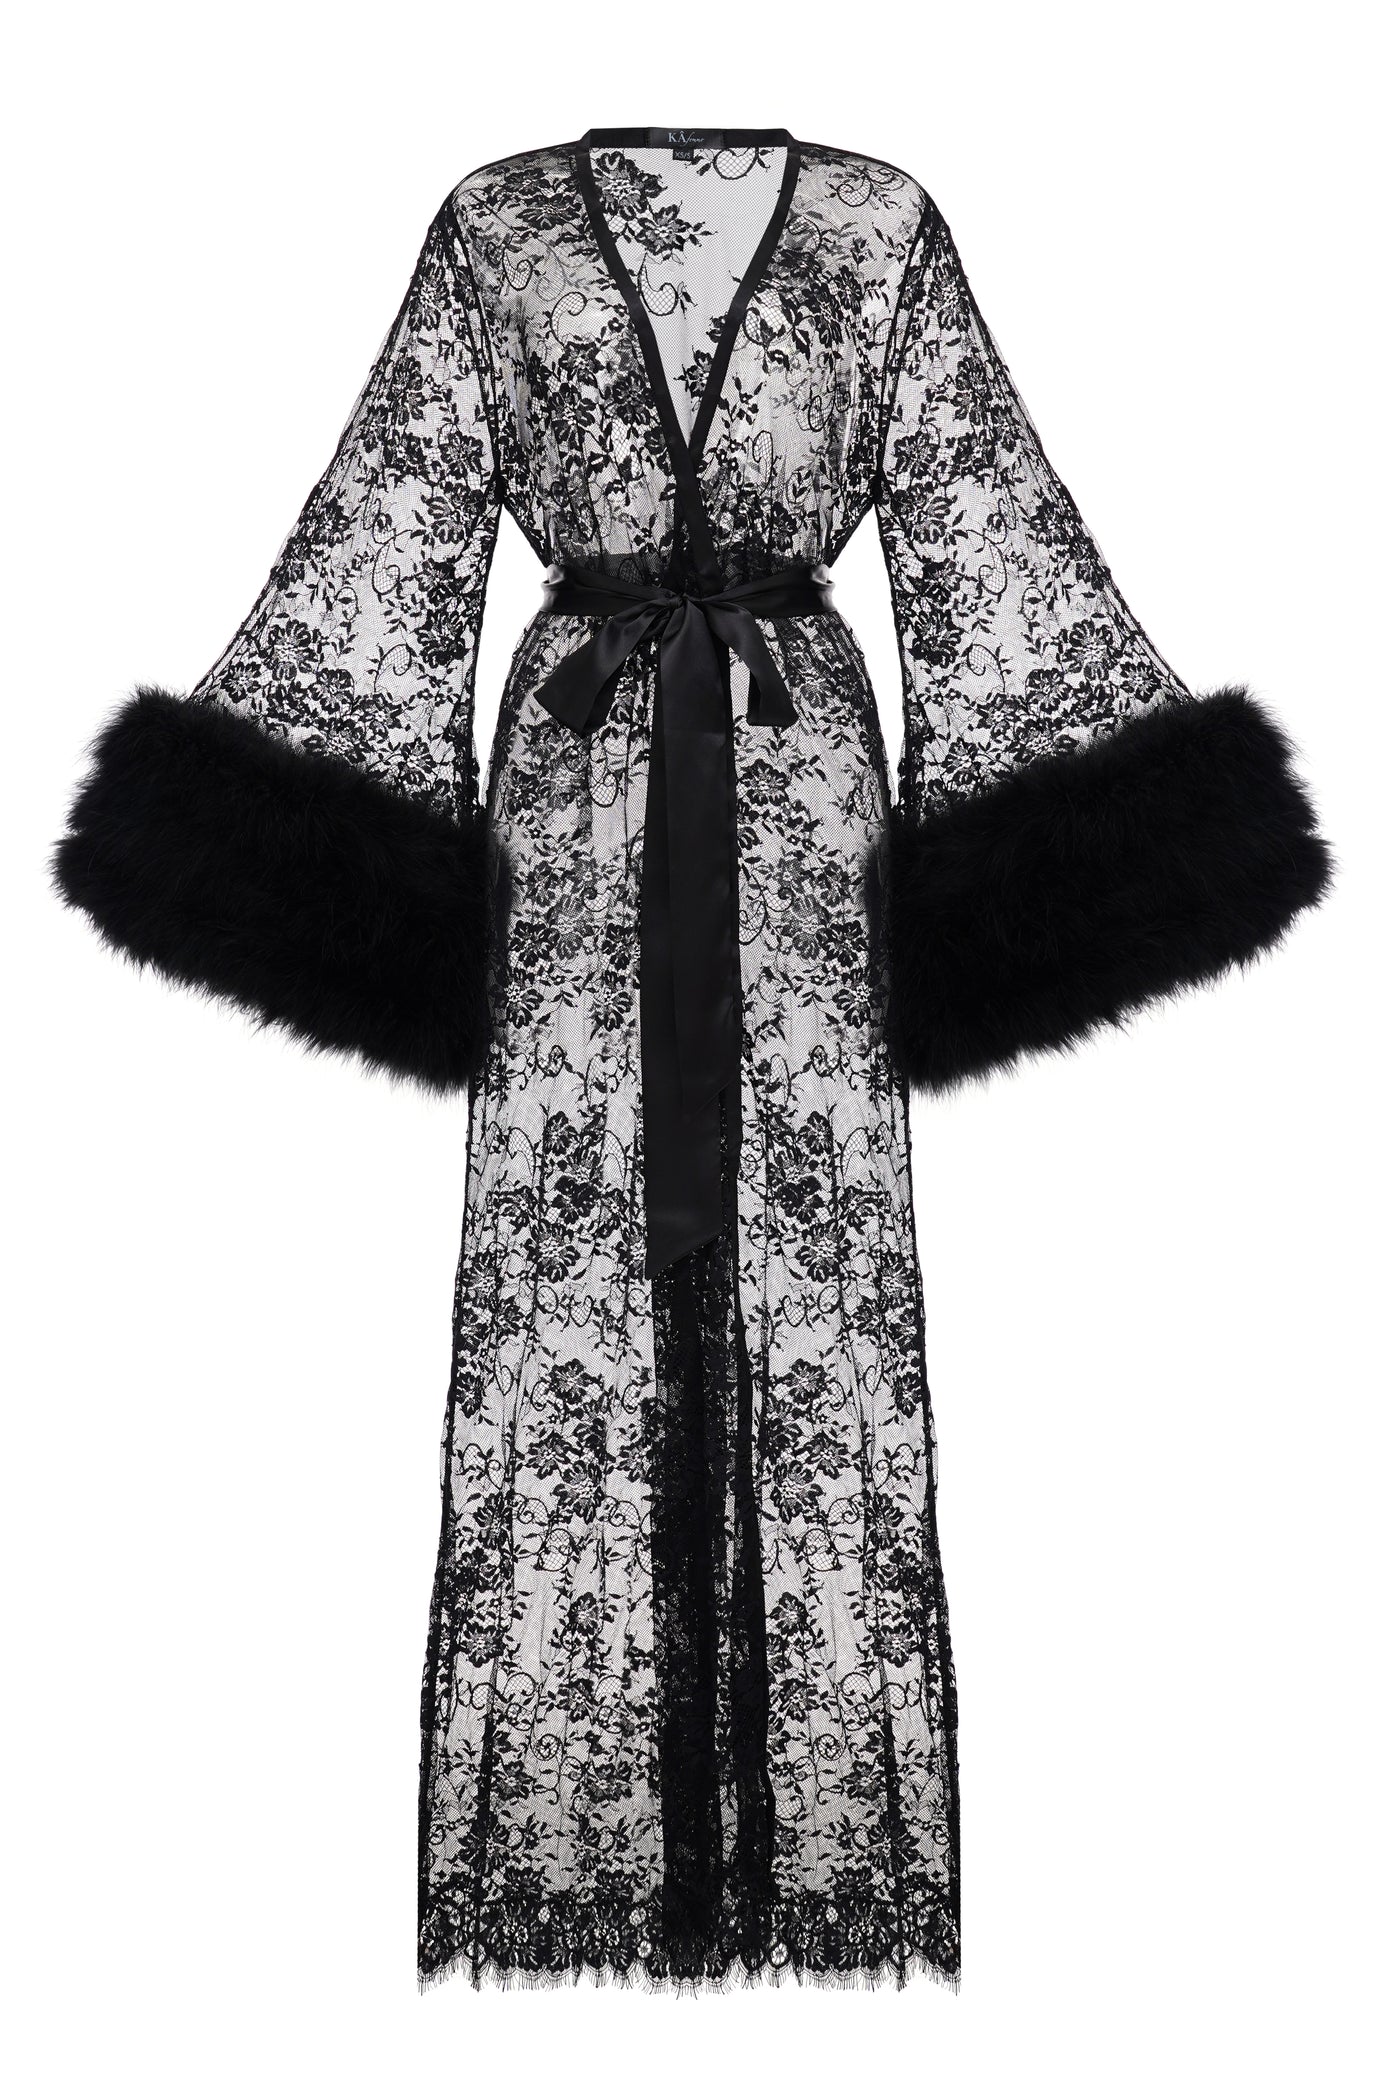 Rich Widow Robe and Nightgown Set in Black